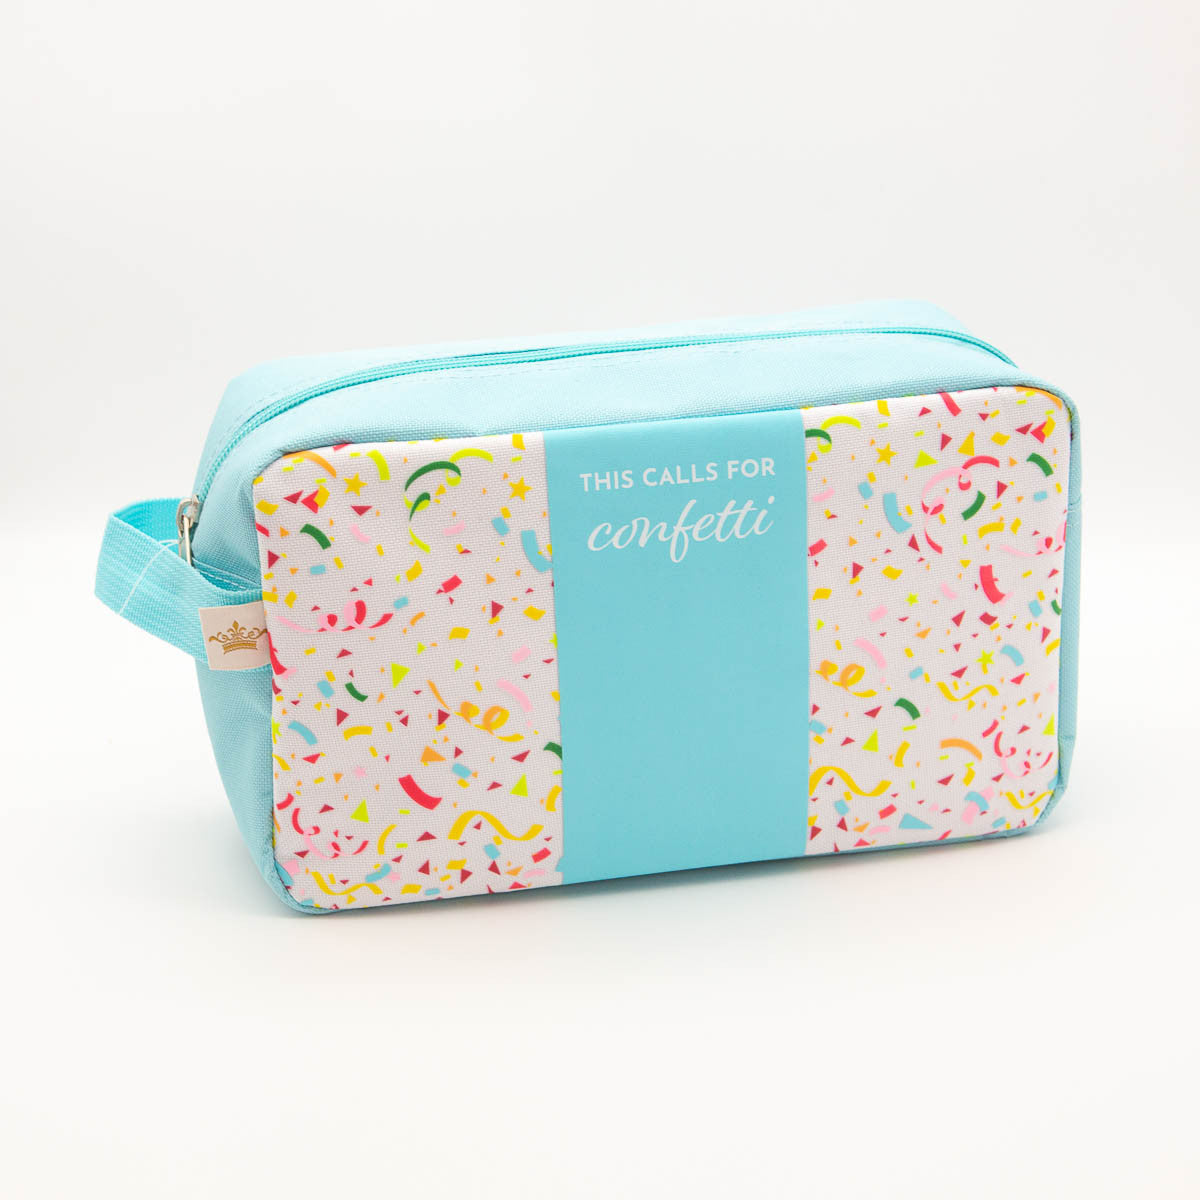 This Calls for Confetti Cosmetic Bag